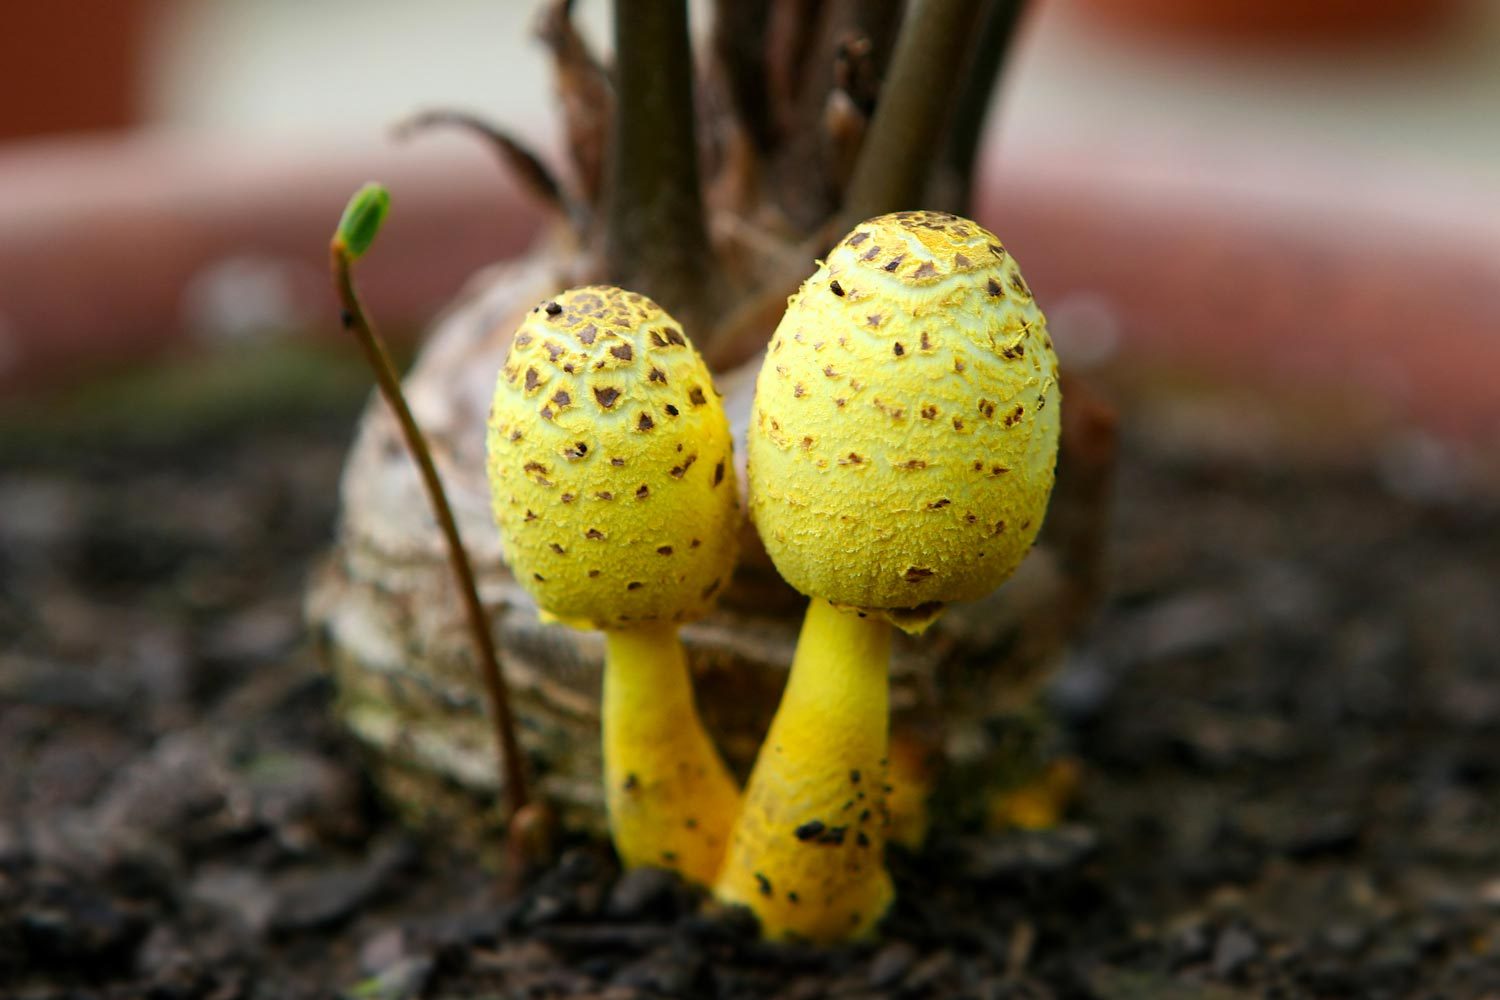 Funky Yellow Mushrooms in a house plant indoors